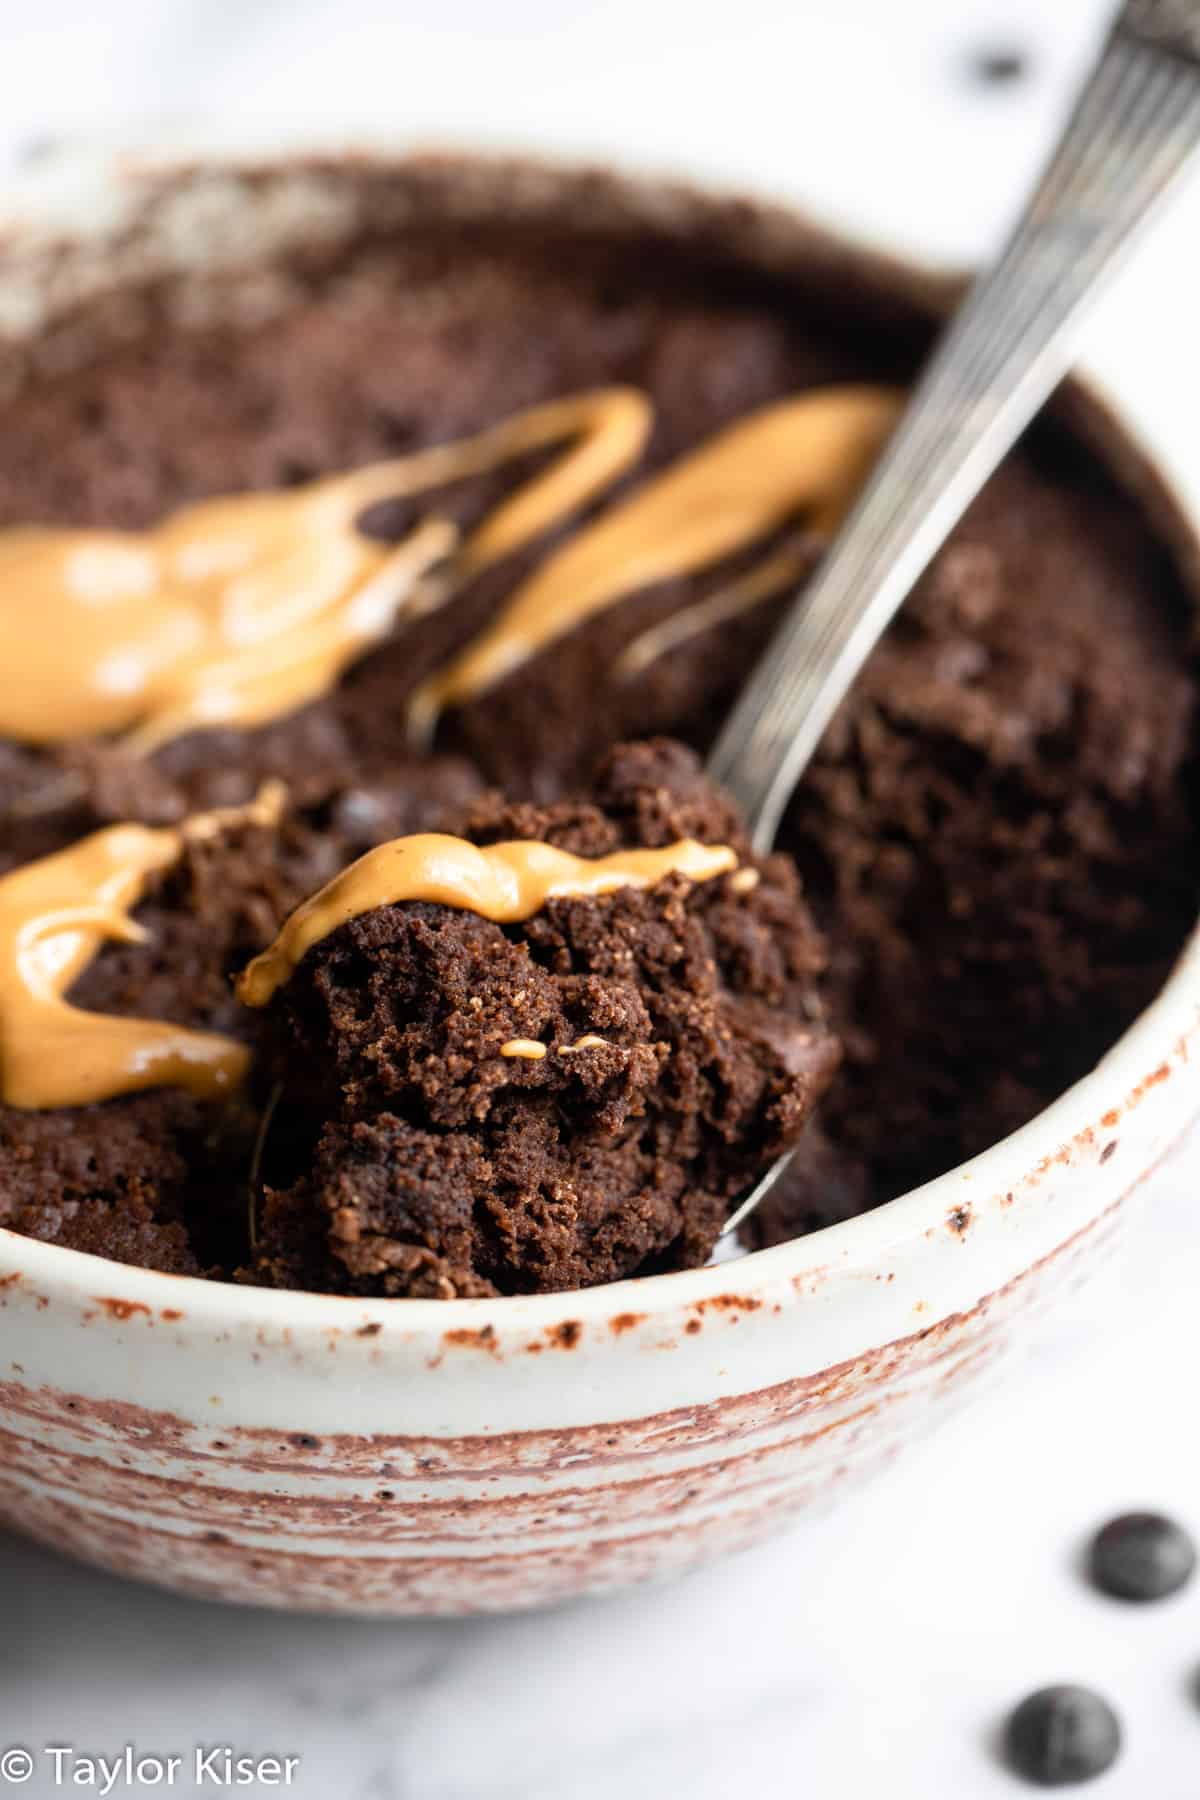 Chocolate keto mug cake with a spoon scooped into it